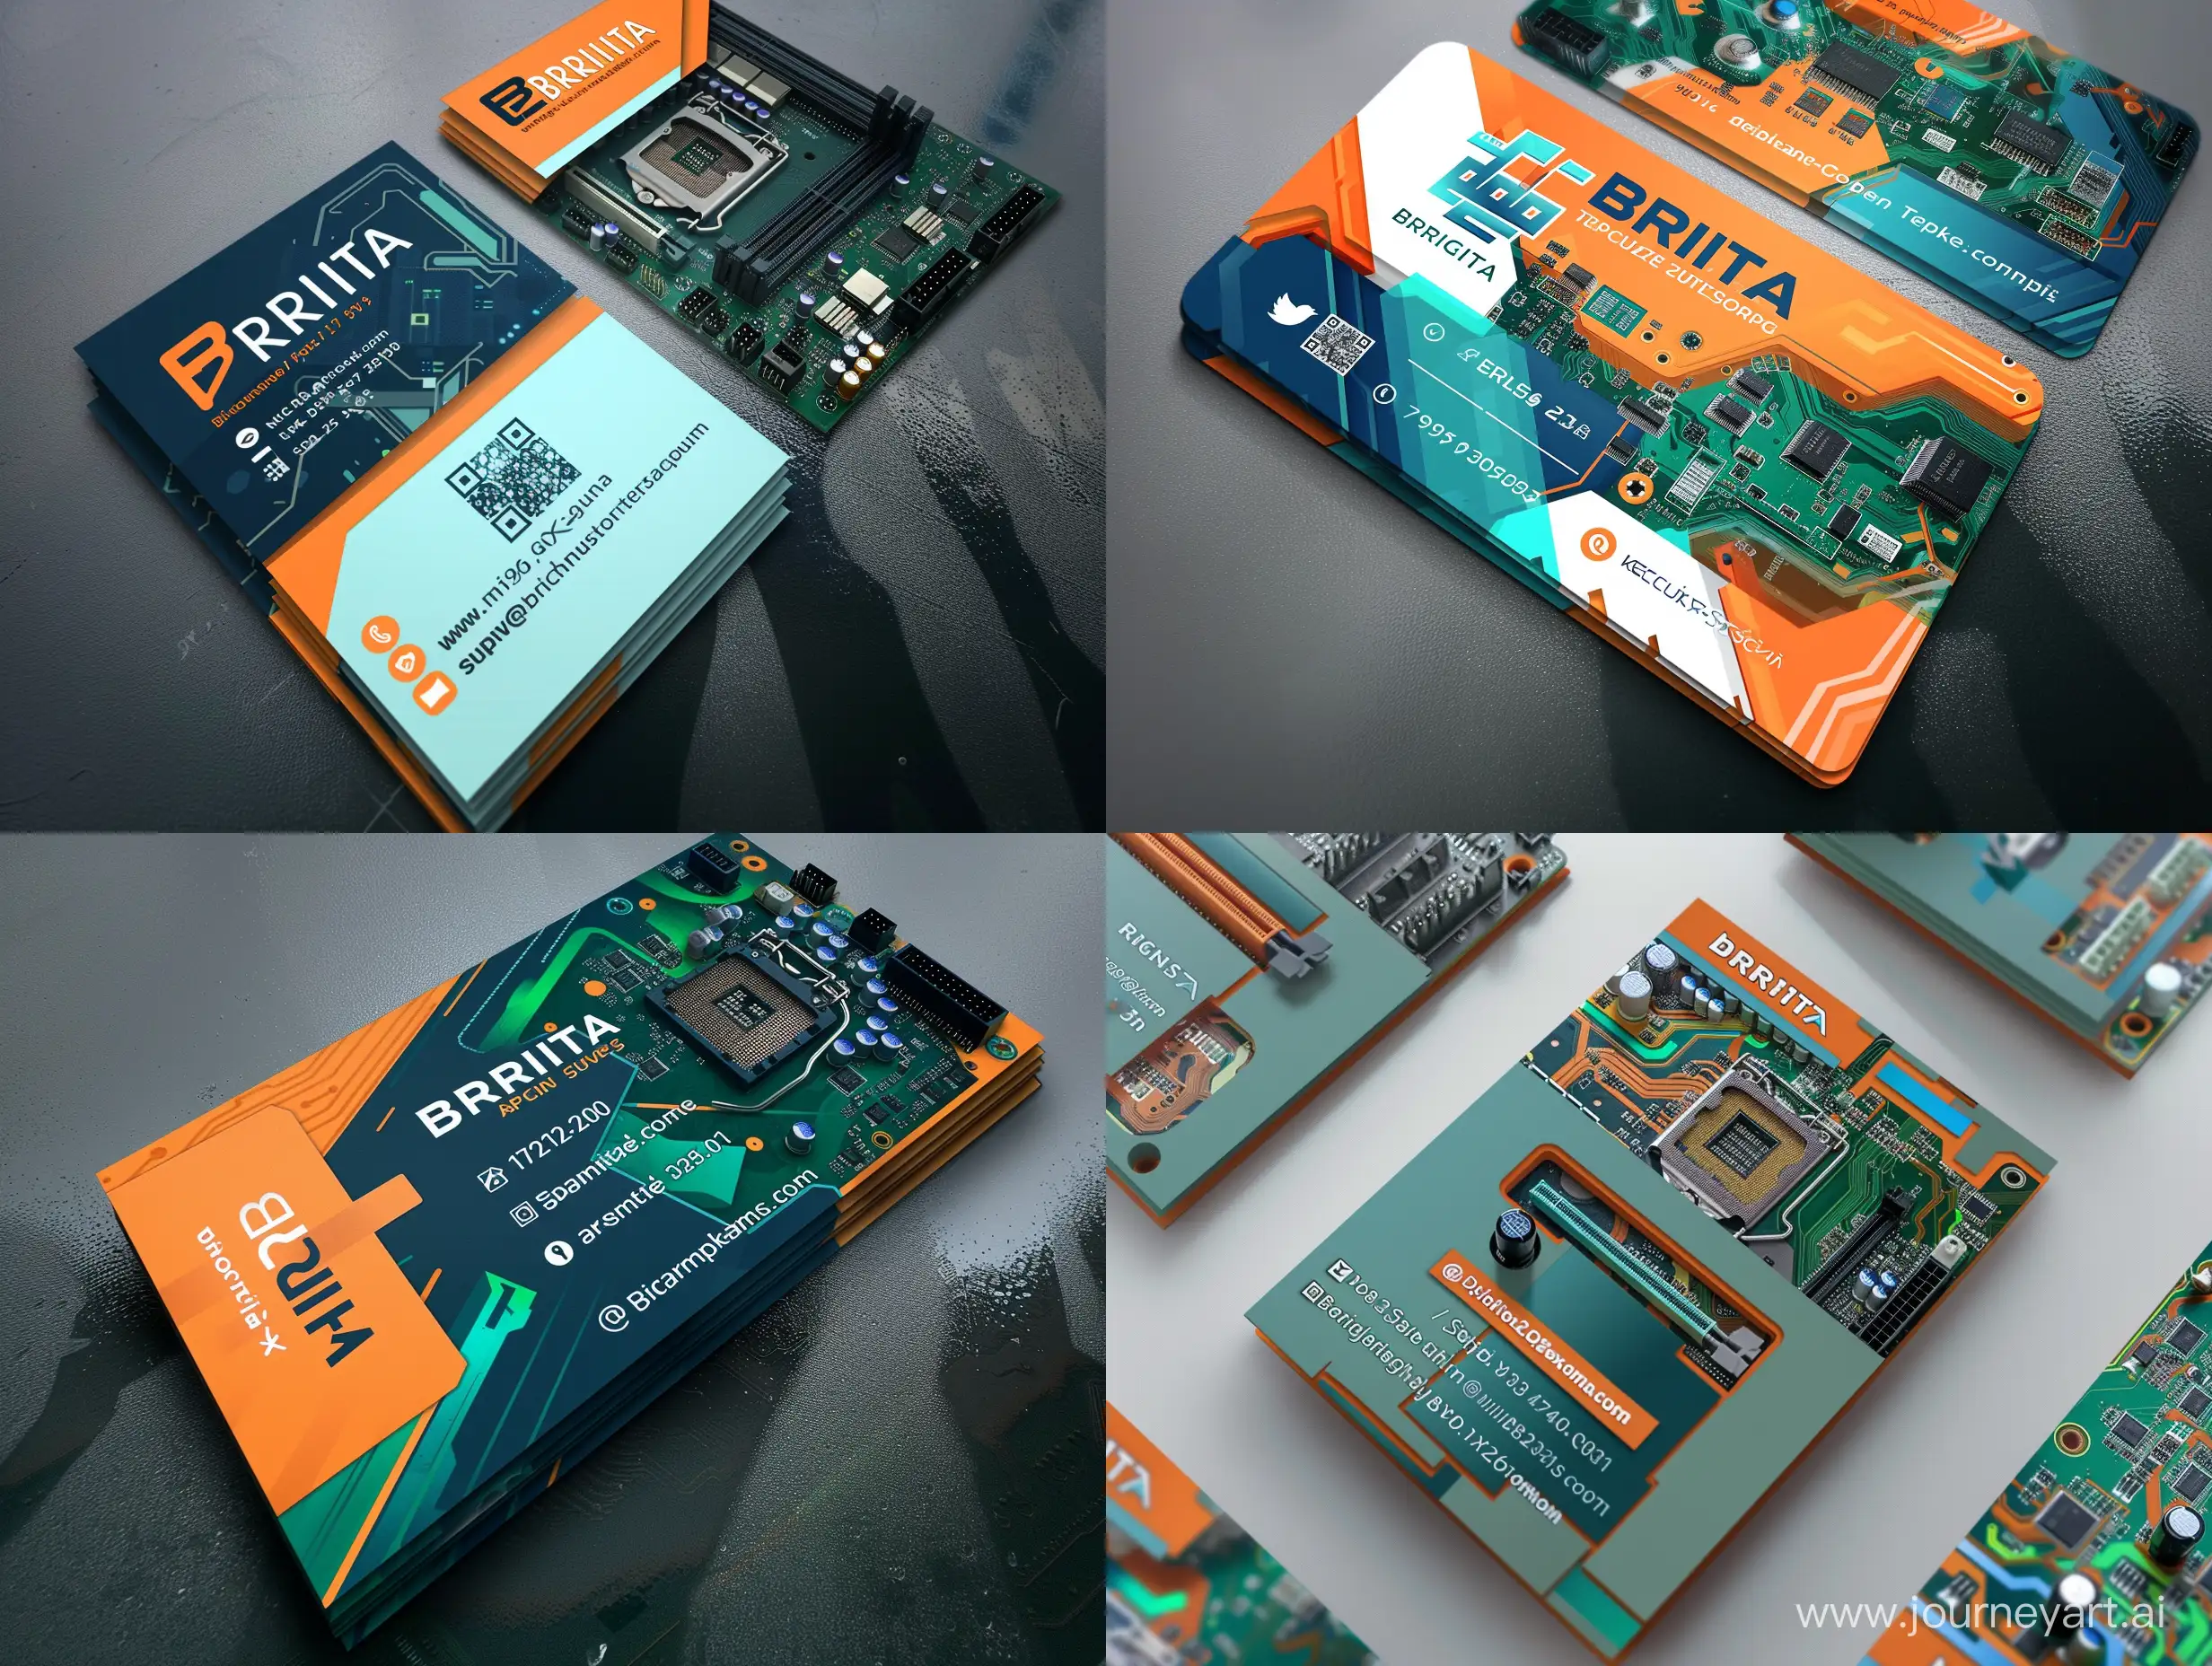 Come up with a design of a business card for the director of the company. Parts of the computer or motherboard should be visible on pictures. The company name is BRIGITA. The company provides information technology services, such as setting up servers and business software. The corporate colors are orange, blue and light green. The design should reflect the specifics of the company's services.